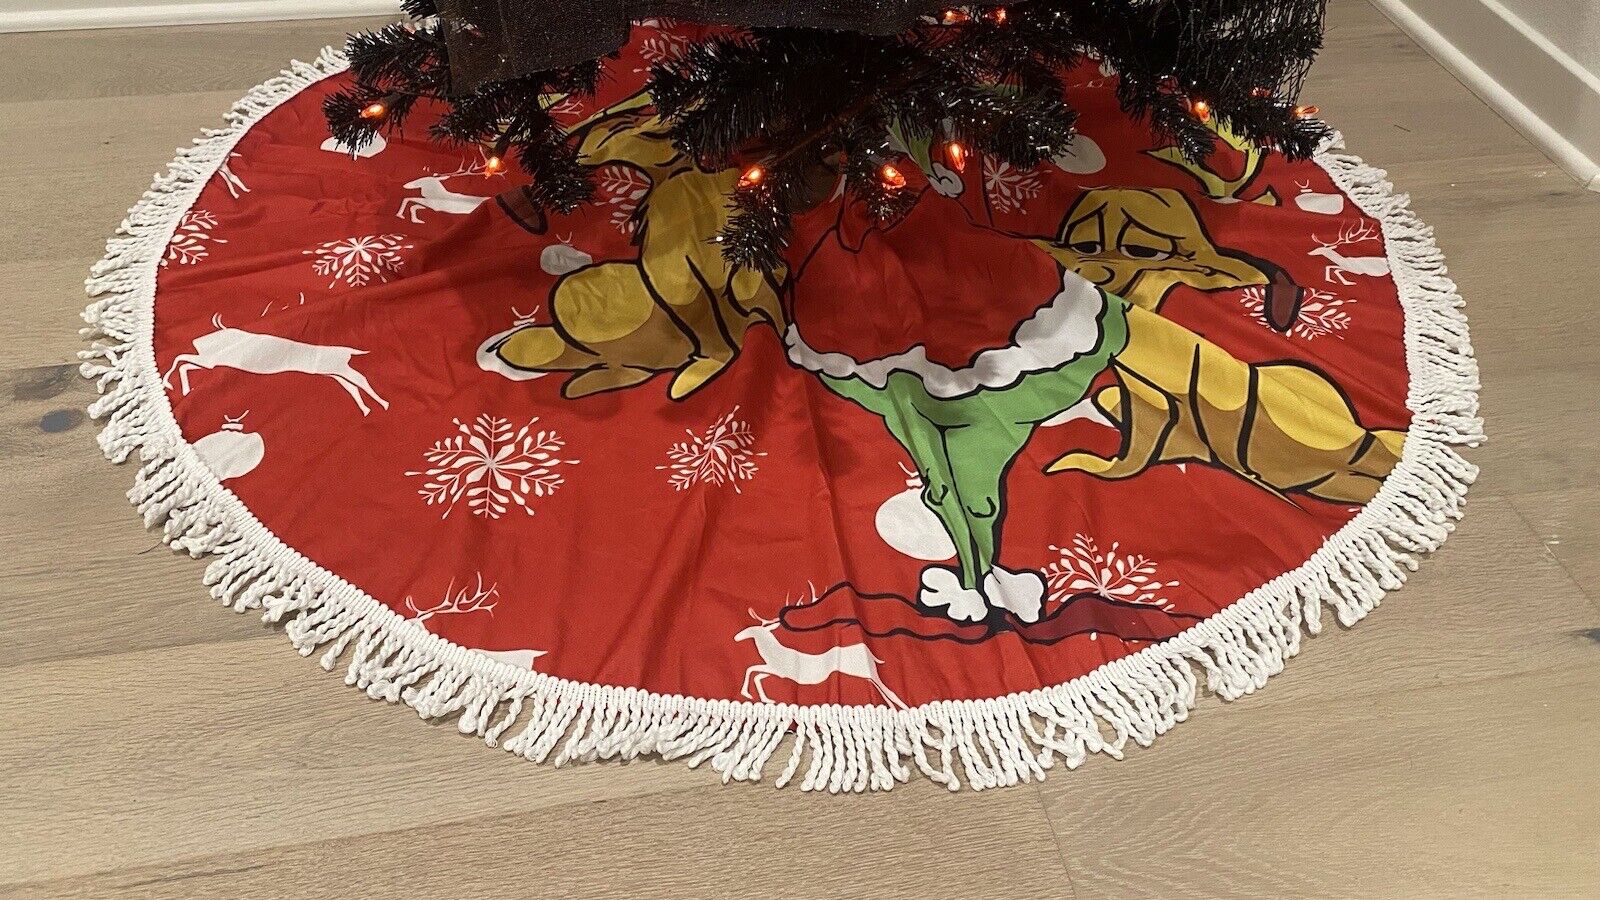 Dr Seuss How the Grinch Stole Christmas tree skirt